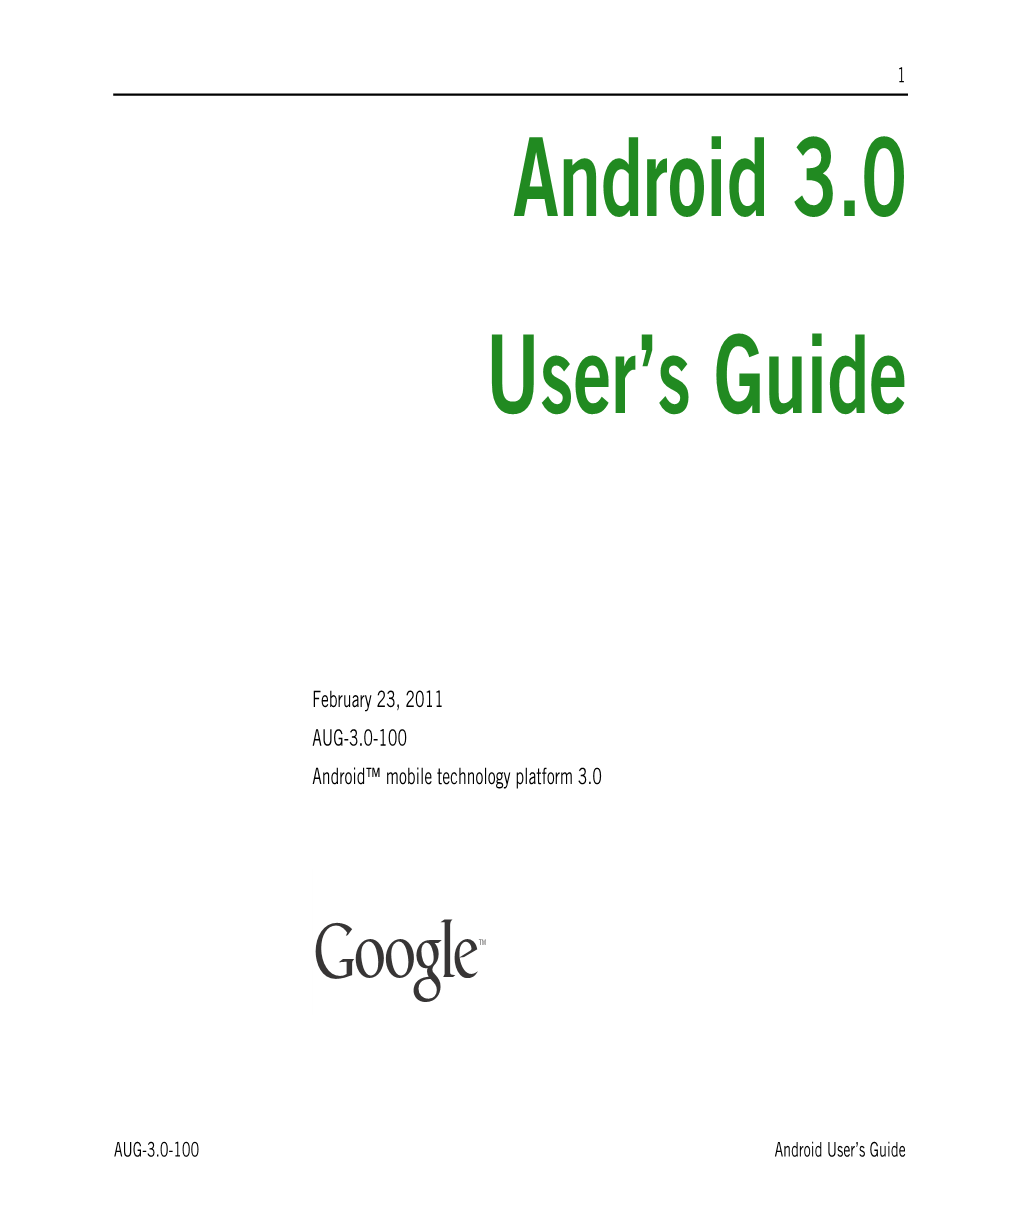 Android 3.0 User's Guide